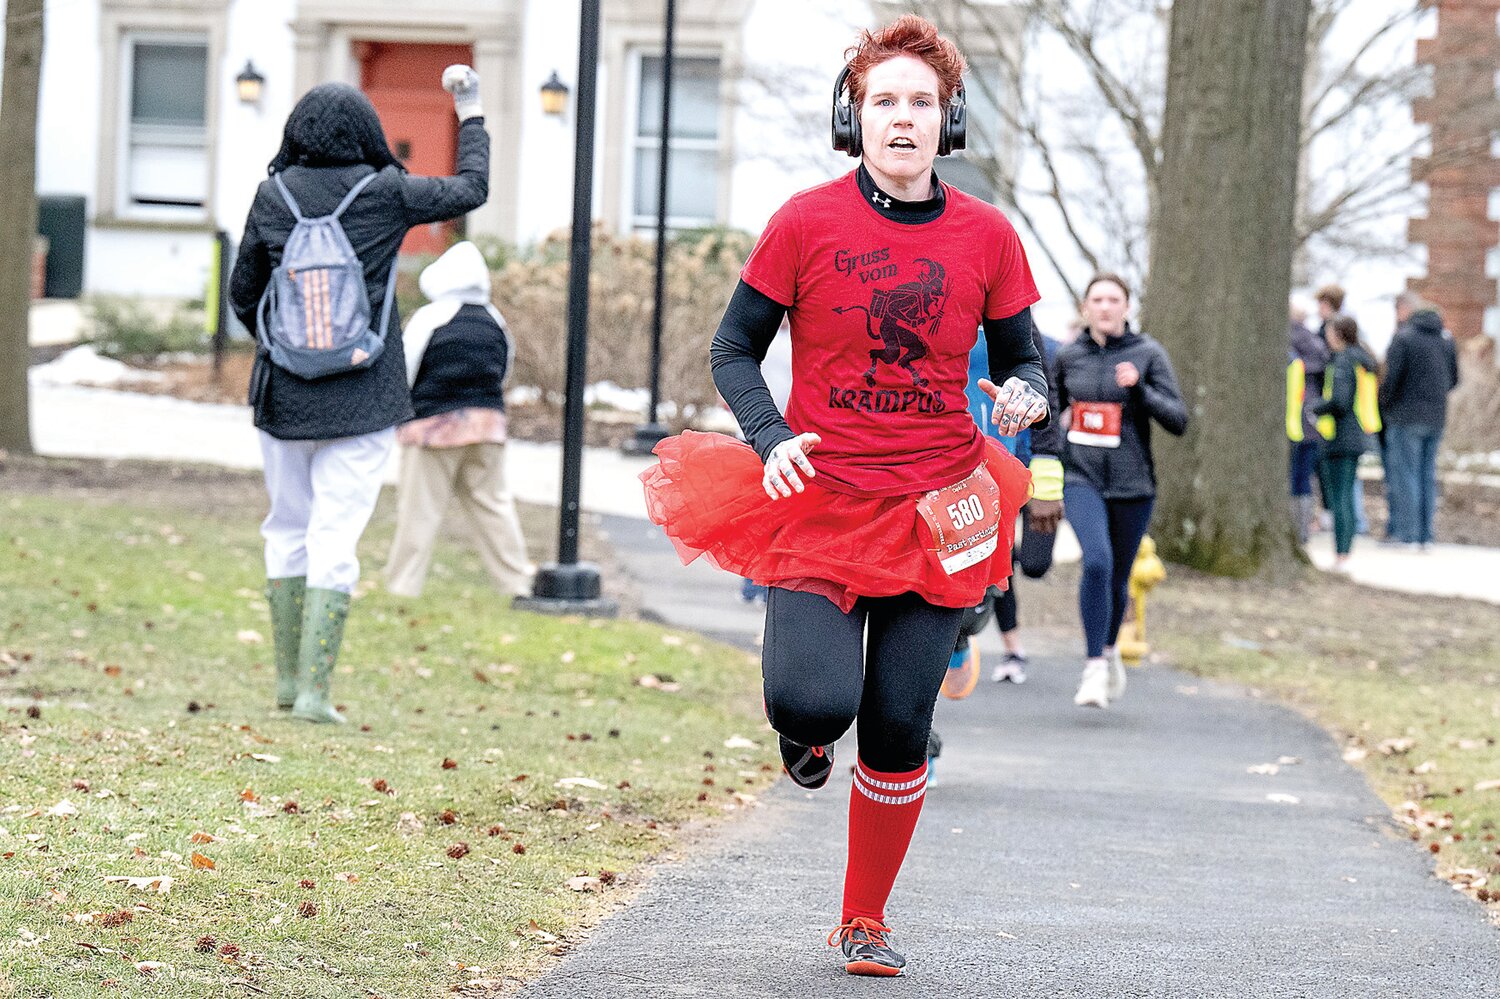 Erin McCardle, of Philadelphia, was one of many runner to sport their romantic best as they made their way through the race course at Delaware Valley University during the Great Cupid Run.